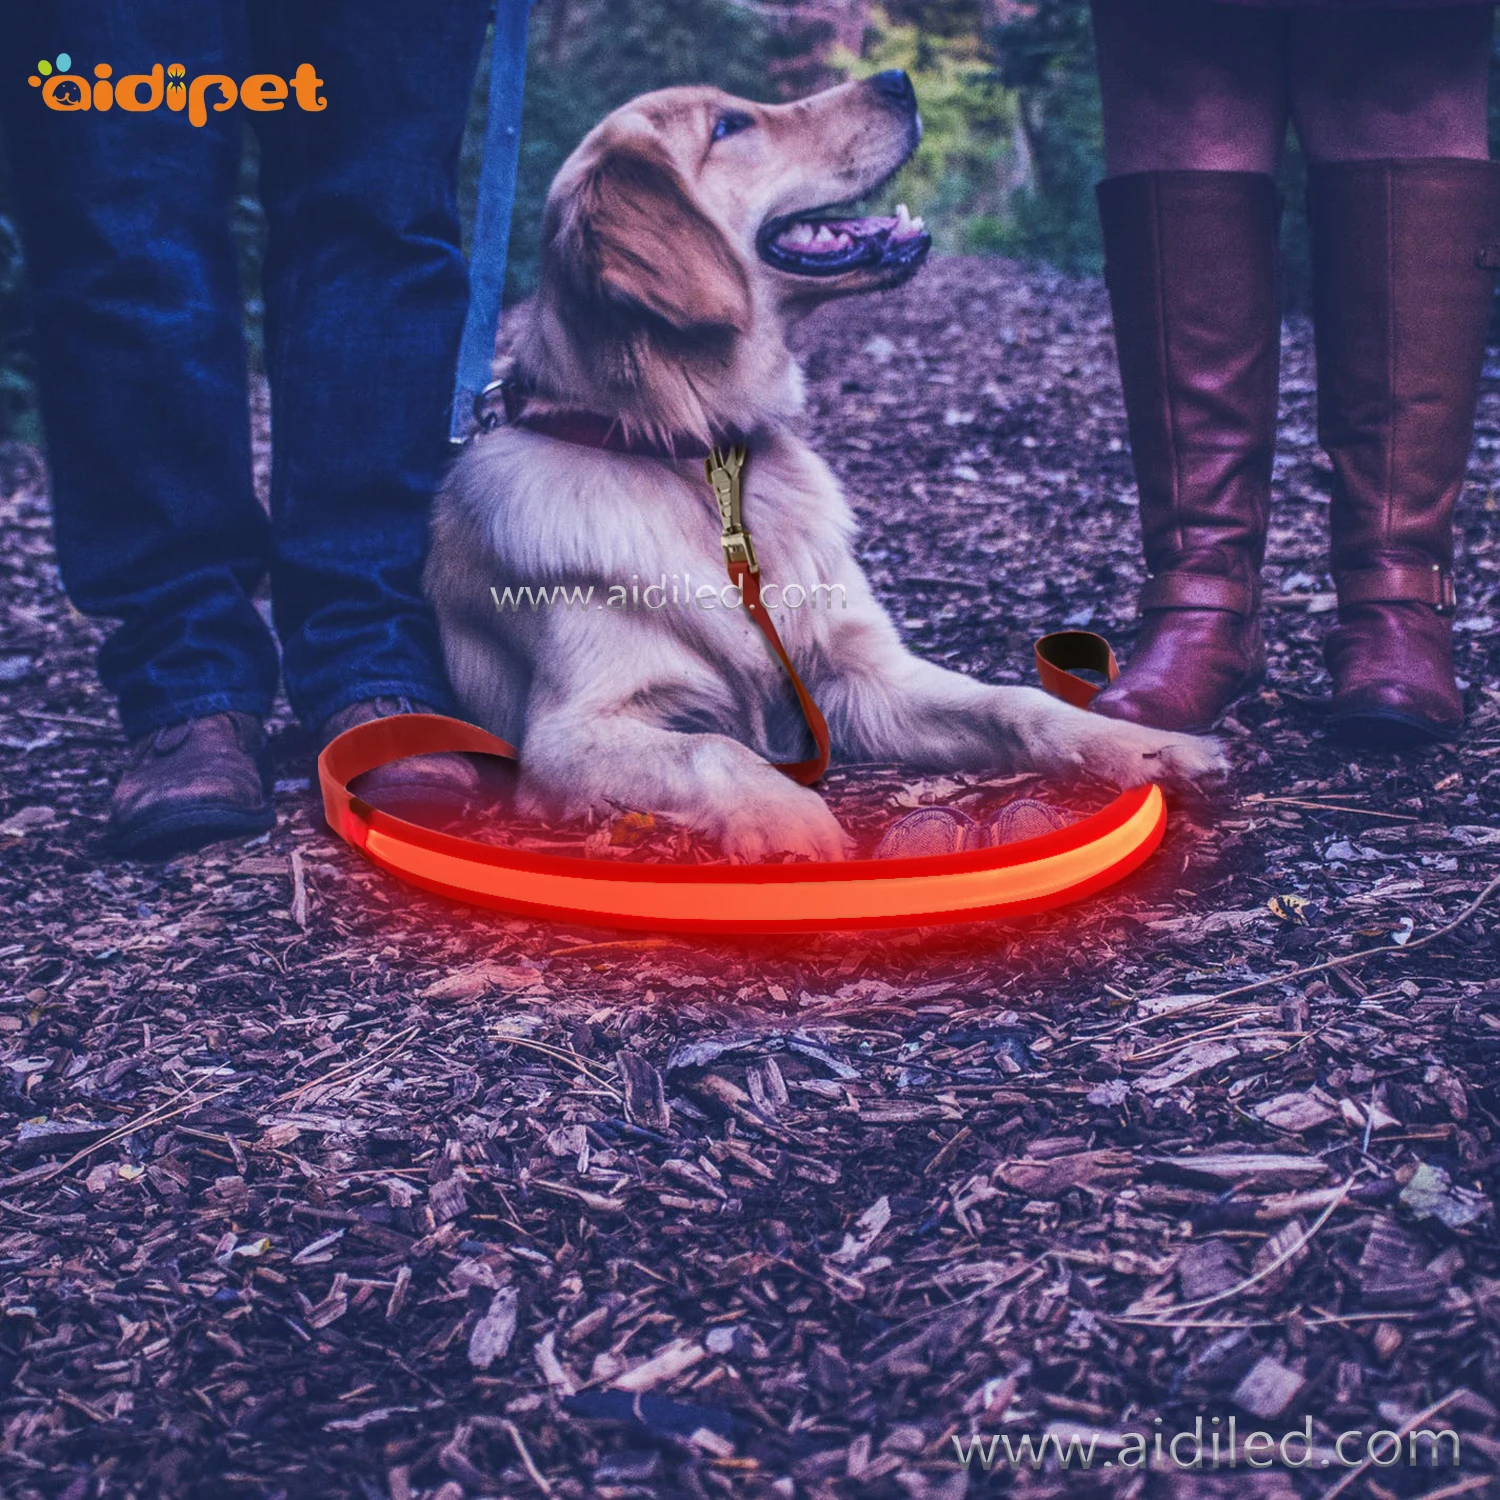 New Product Rainbow Colorful Soft Rechargeable Led Dog Harness